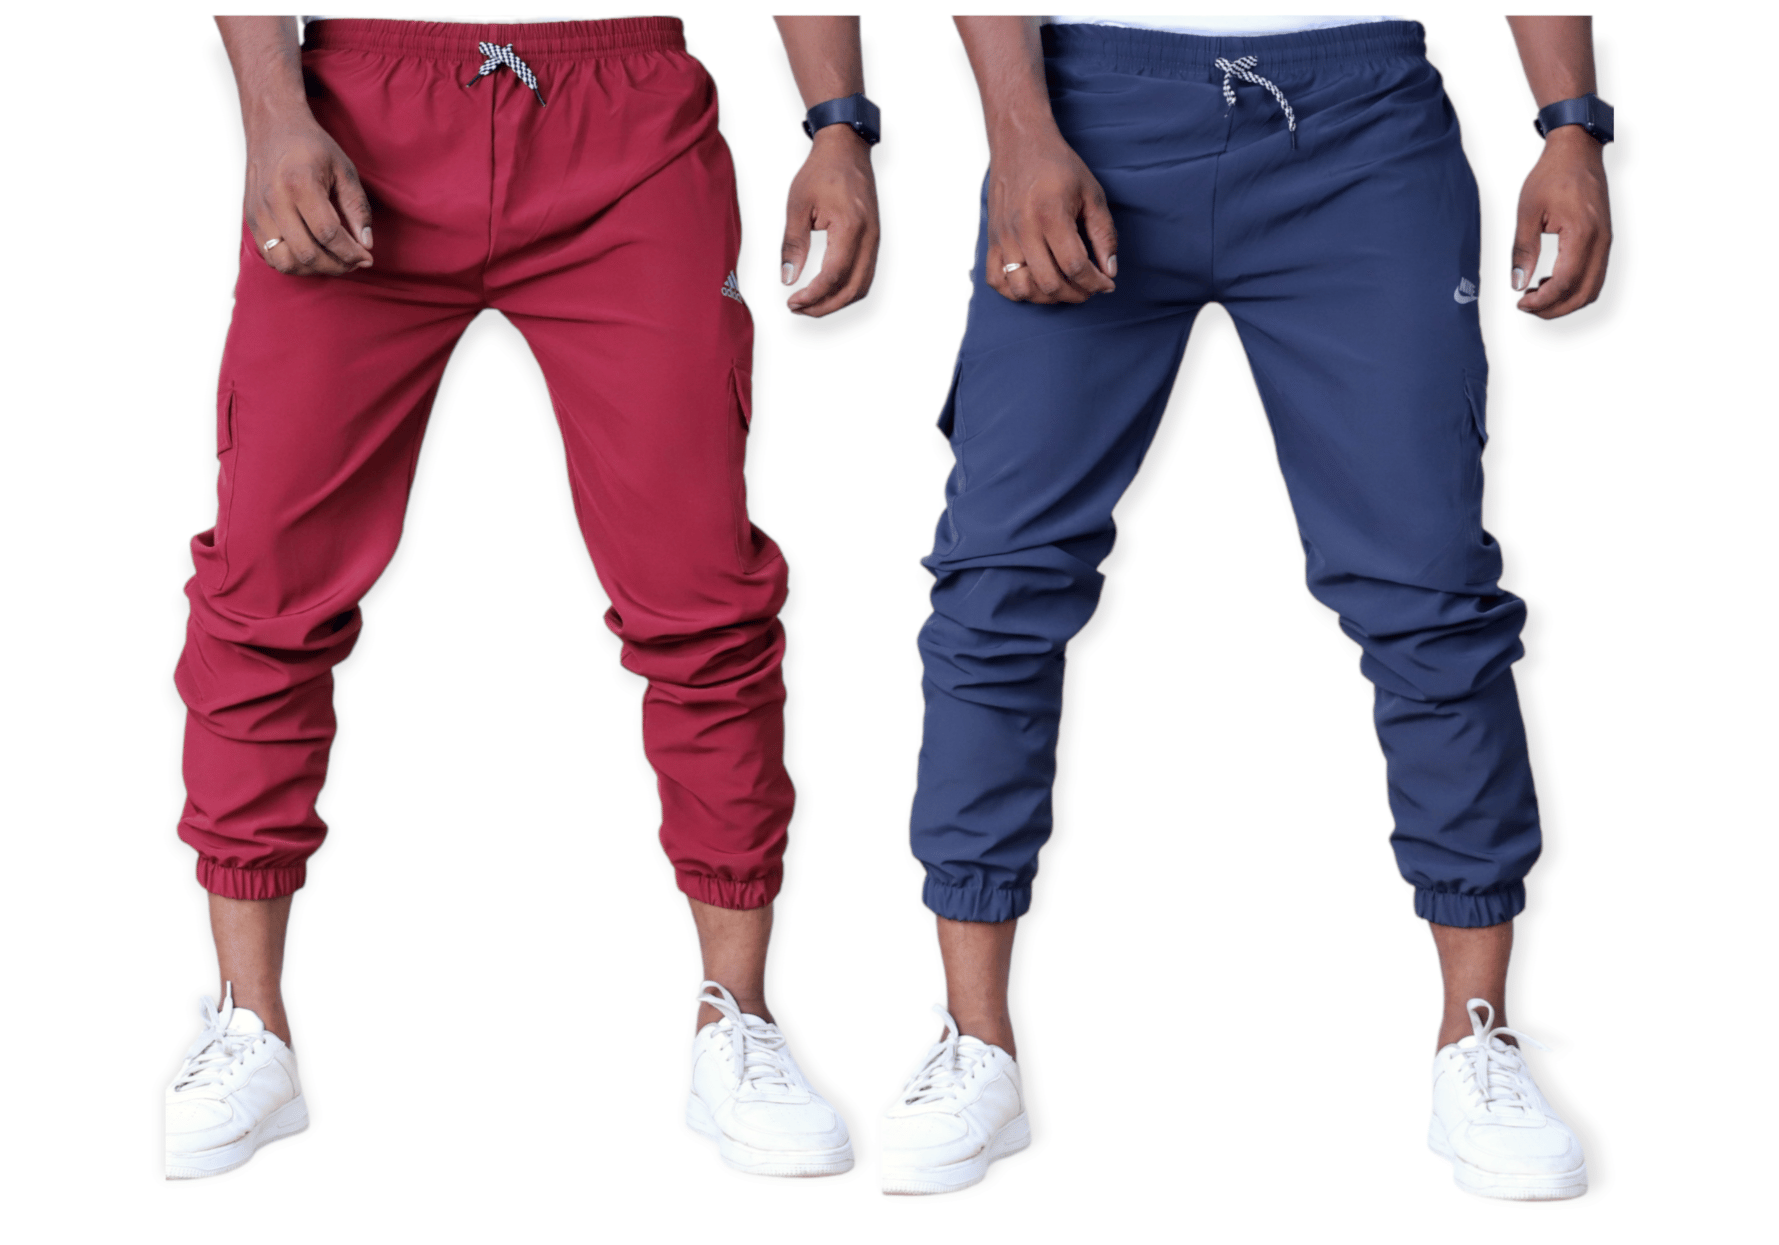 Kraasa track pants || Best Track Pant For men || Gym Pants || Combo Pack -  YouTube